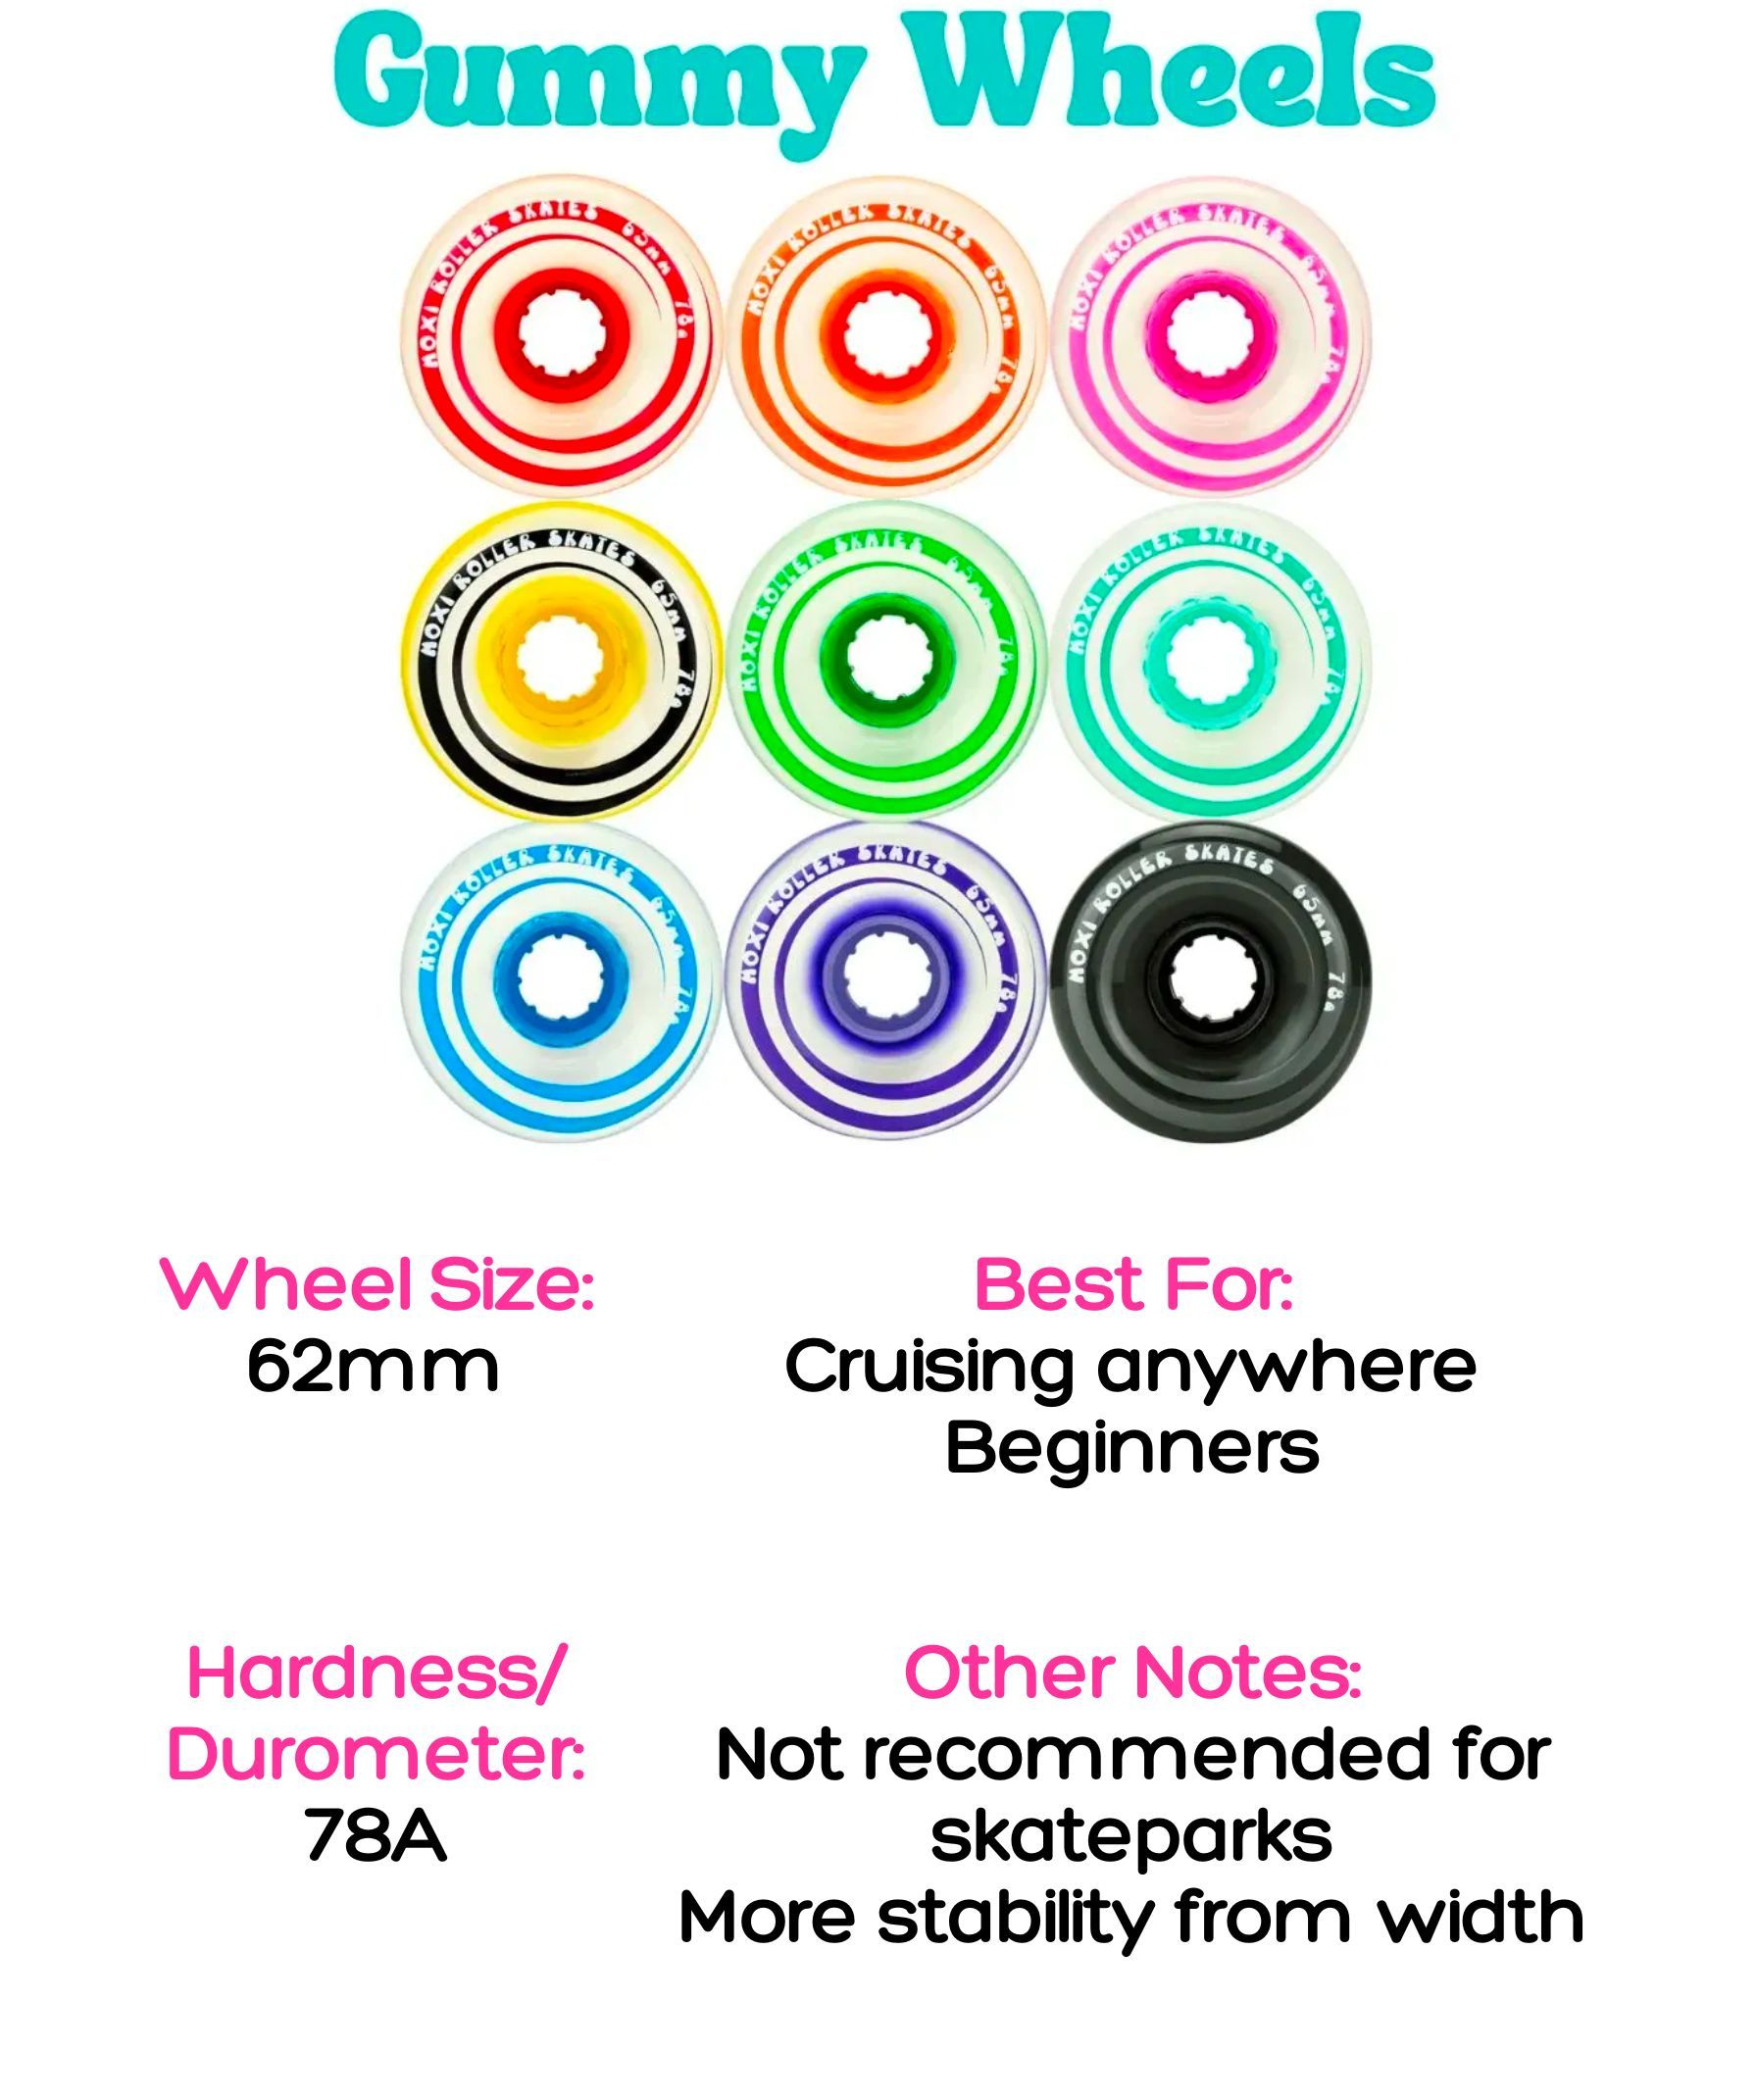 gummy wheels 52 mm, 78A hardness, best for cruising anywhere and beginners, not recommended for skateparks, more stability from width. 